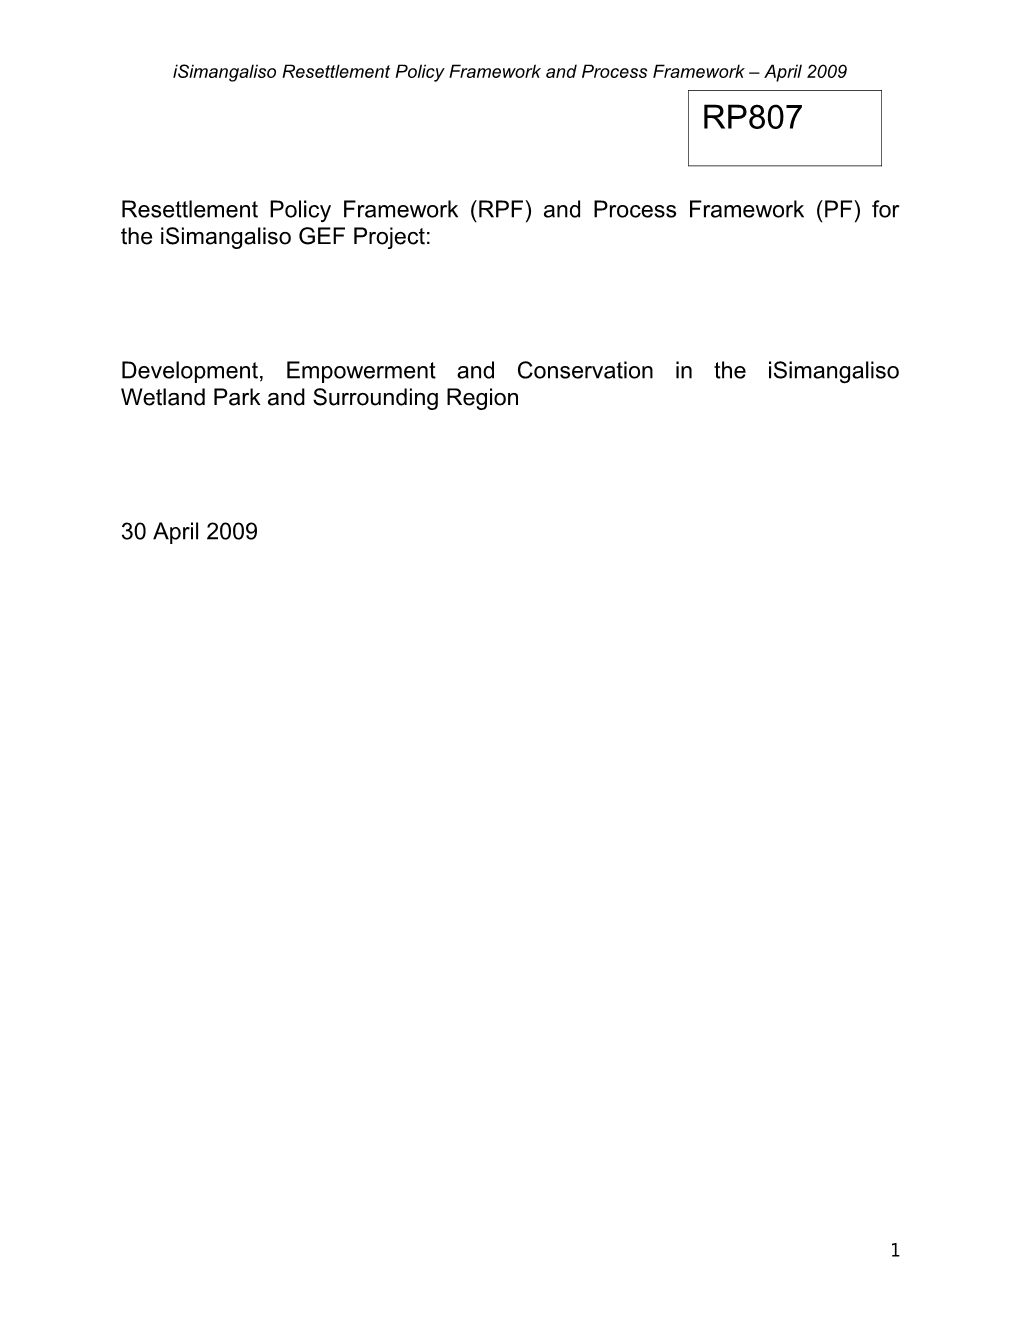 Isimangaliso Resettlement Policy Framework and Process Framework April 2009